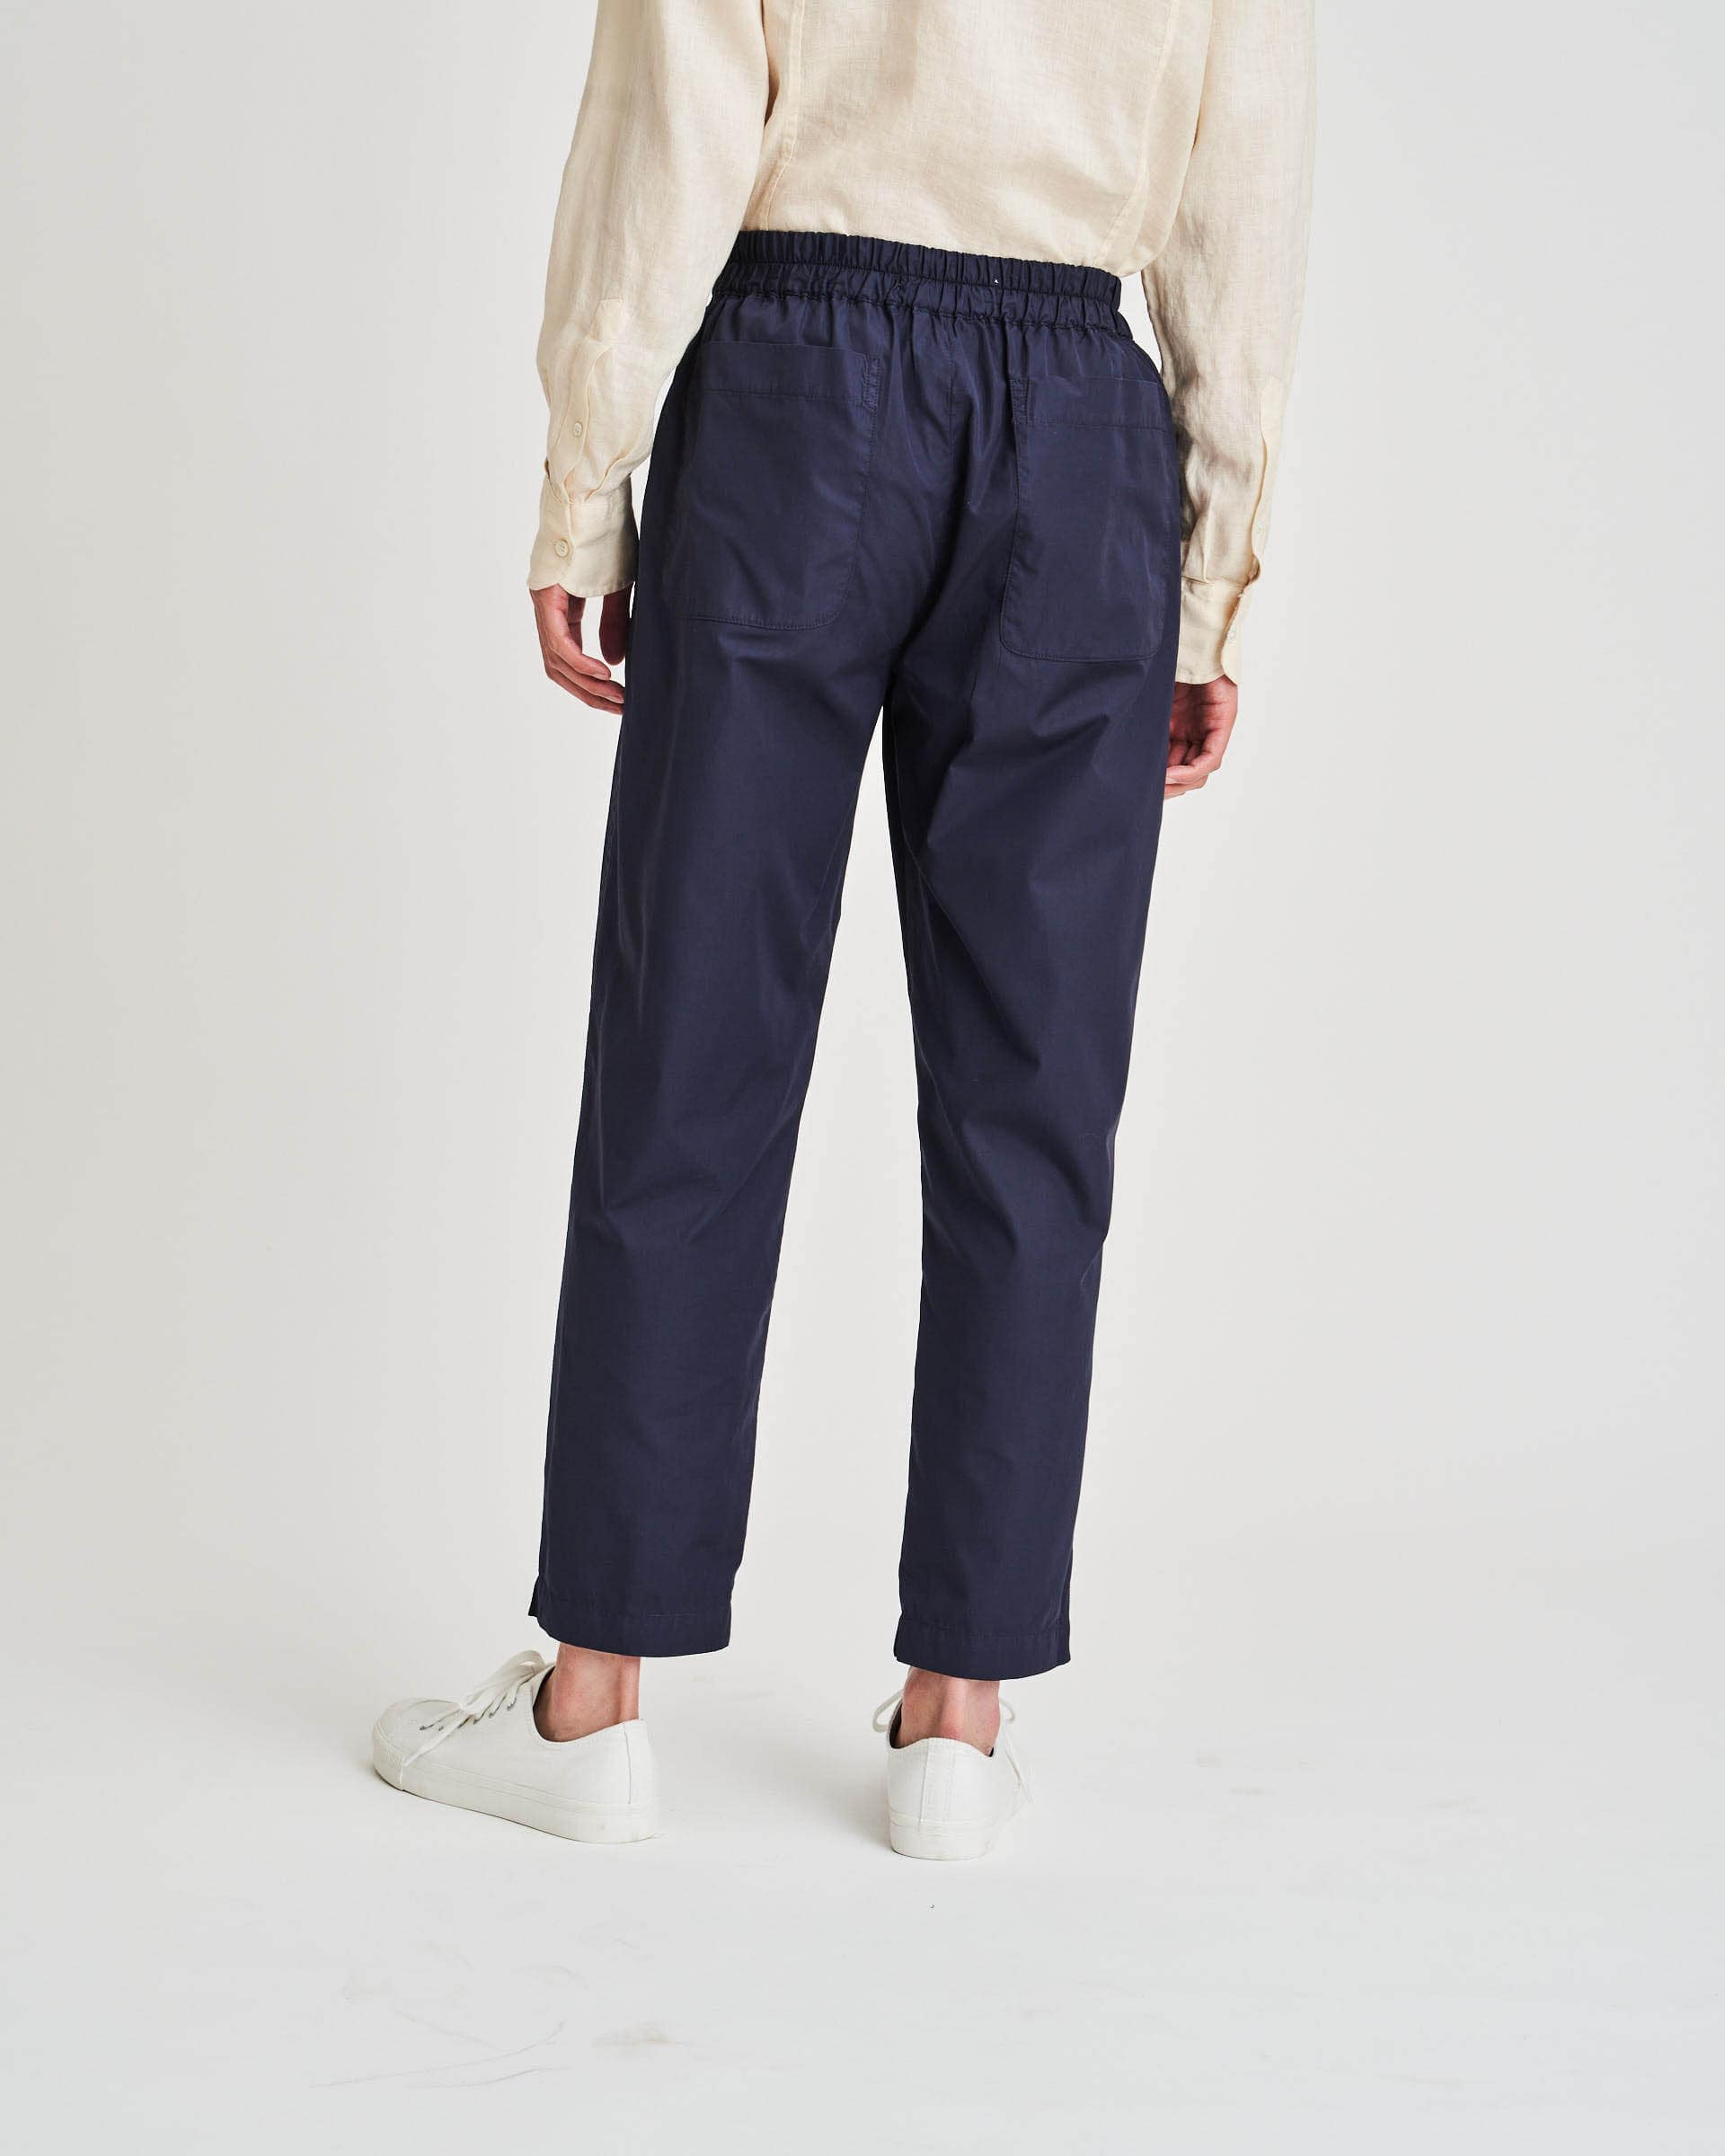 The Market Store | Pants With Elastic Waist